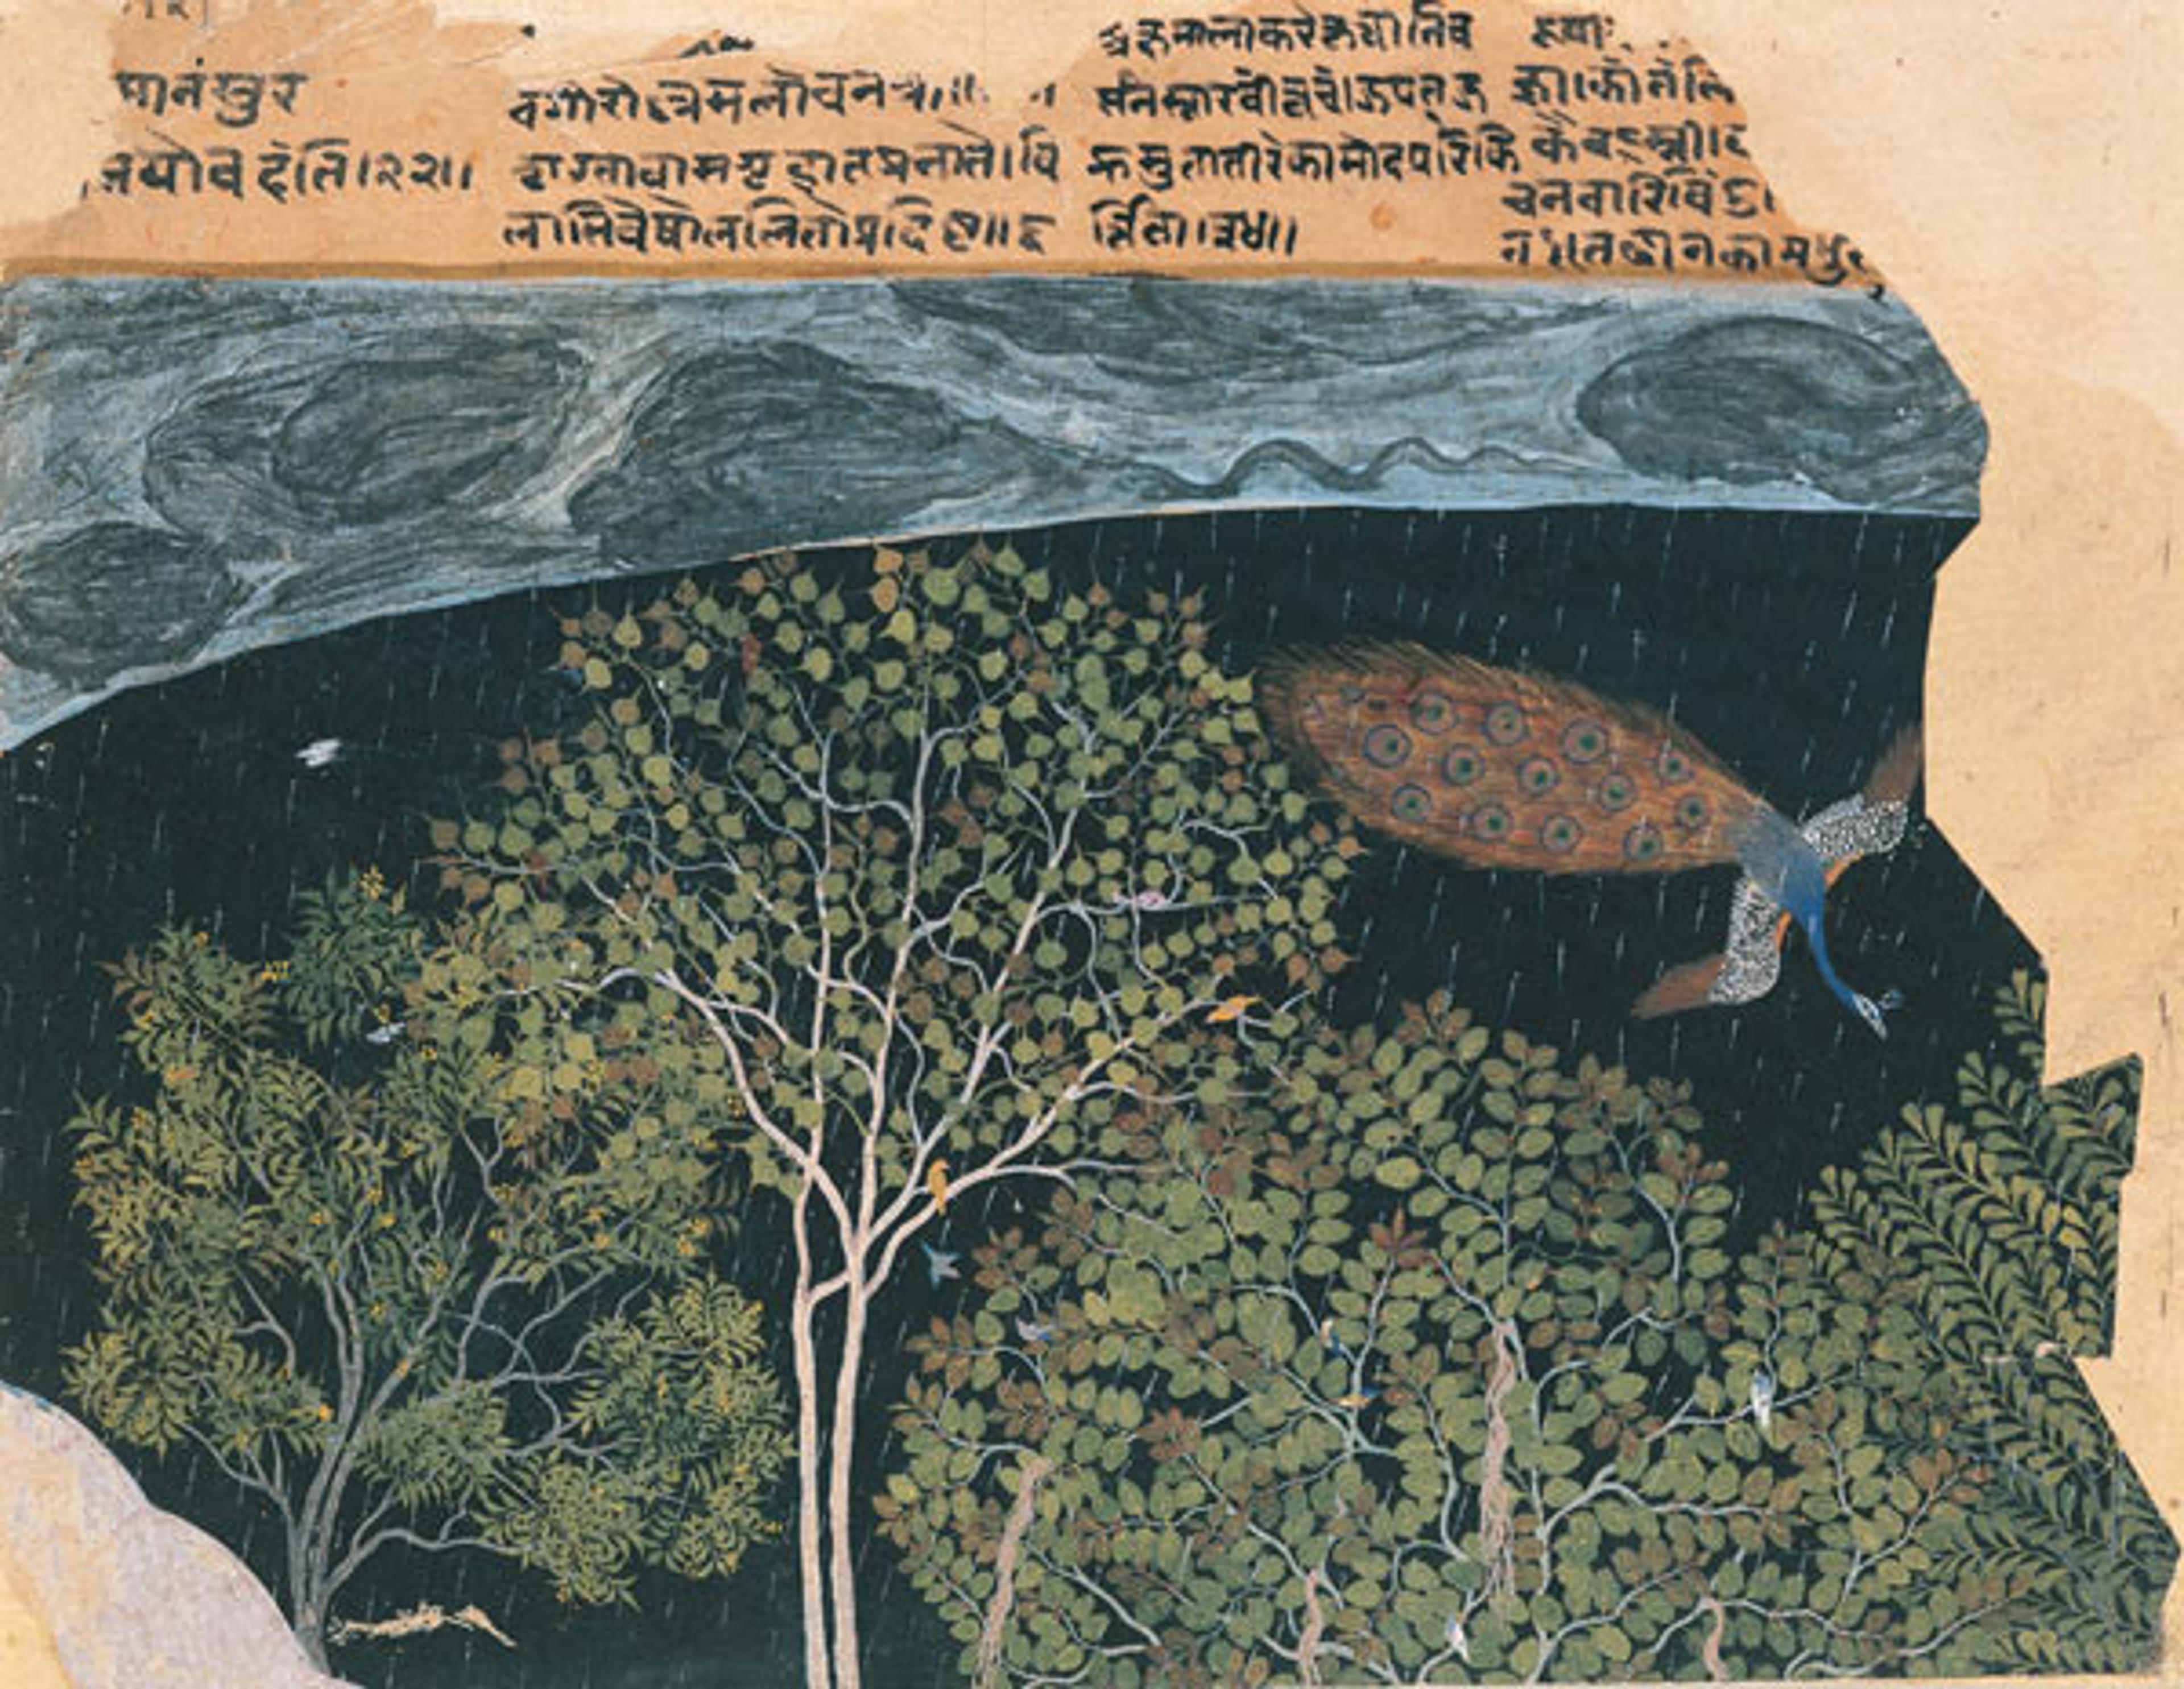 Peacock in a Rainstorm at Night, late 16th century. India, Northern Deccan. Non-Islamic, Hindu. Ink, opaque watercolor, and gold on paper; 6 1/8 x 7 1/2 in. (15.5 x 19 cm). Private Collection, London